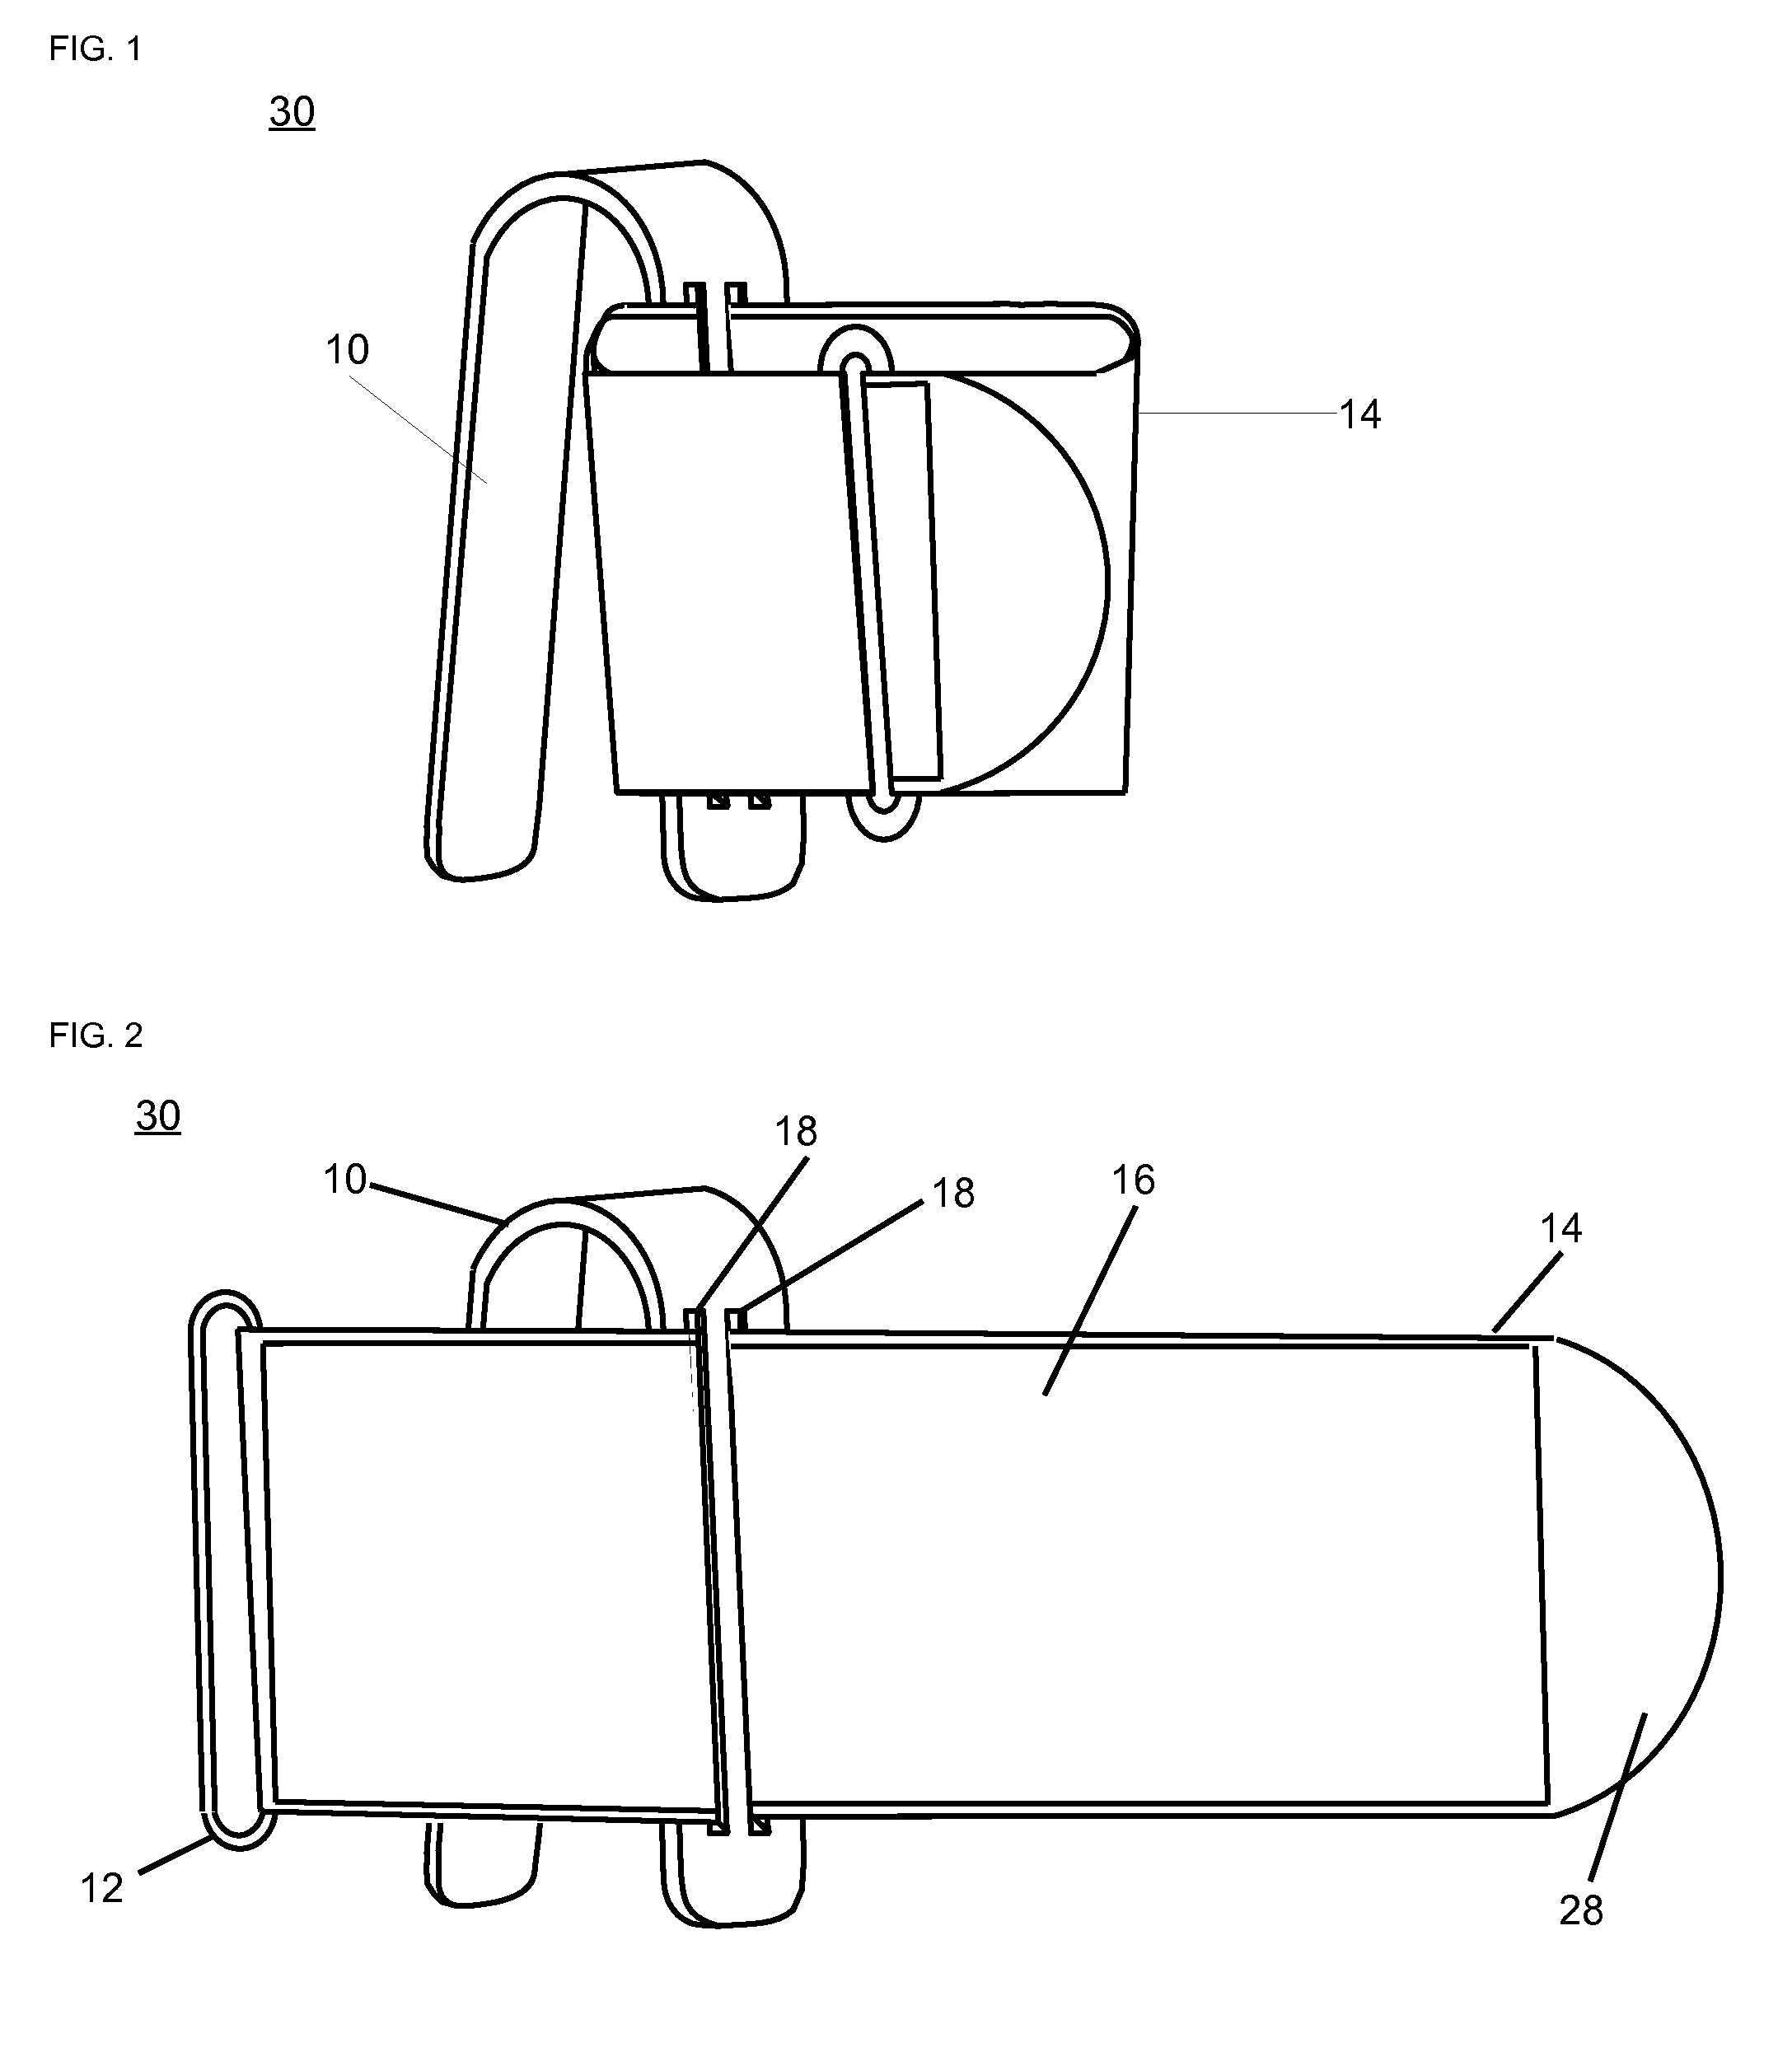 Apparatus for holding objects and methods of using and making the same